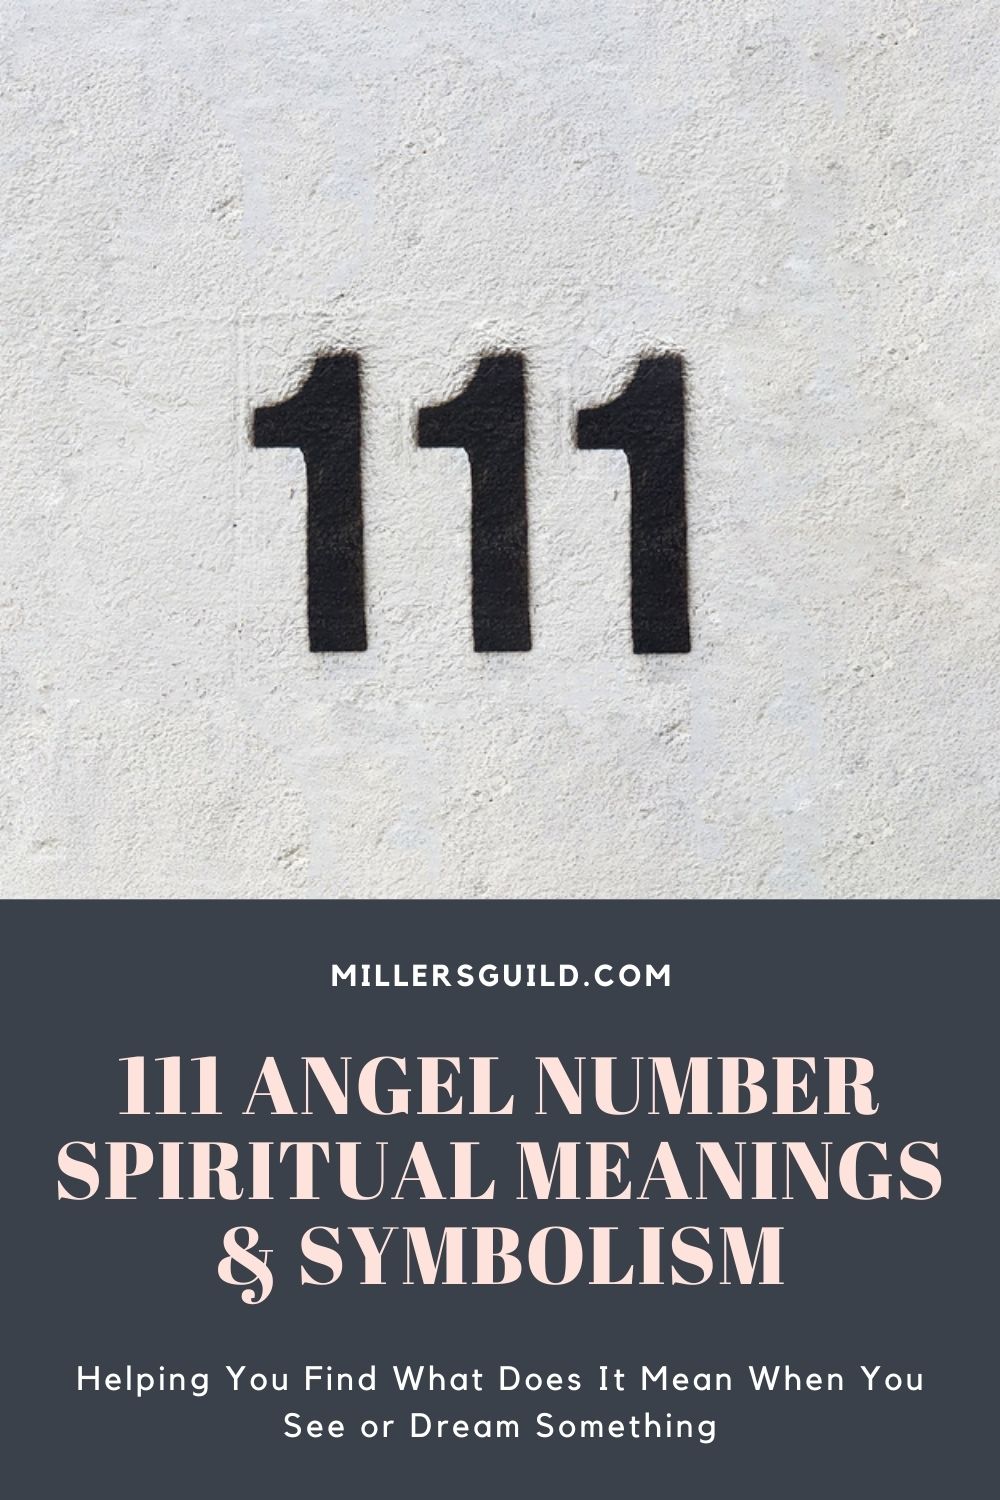 111 Angel Number Spiritual Meanings & Symbolism 2